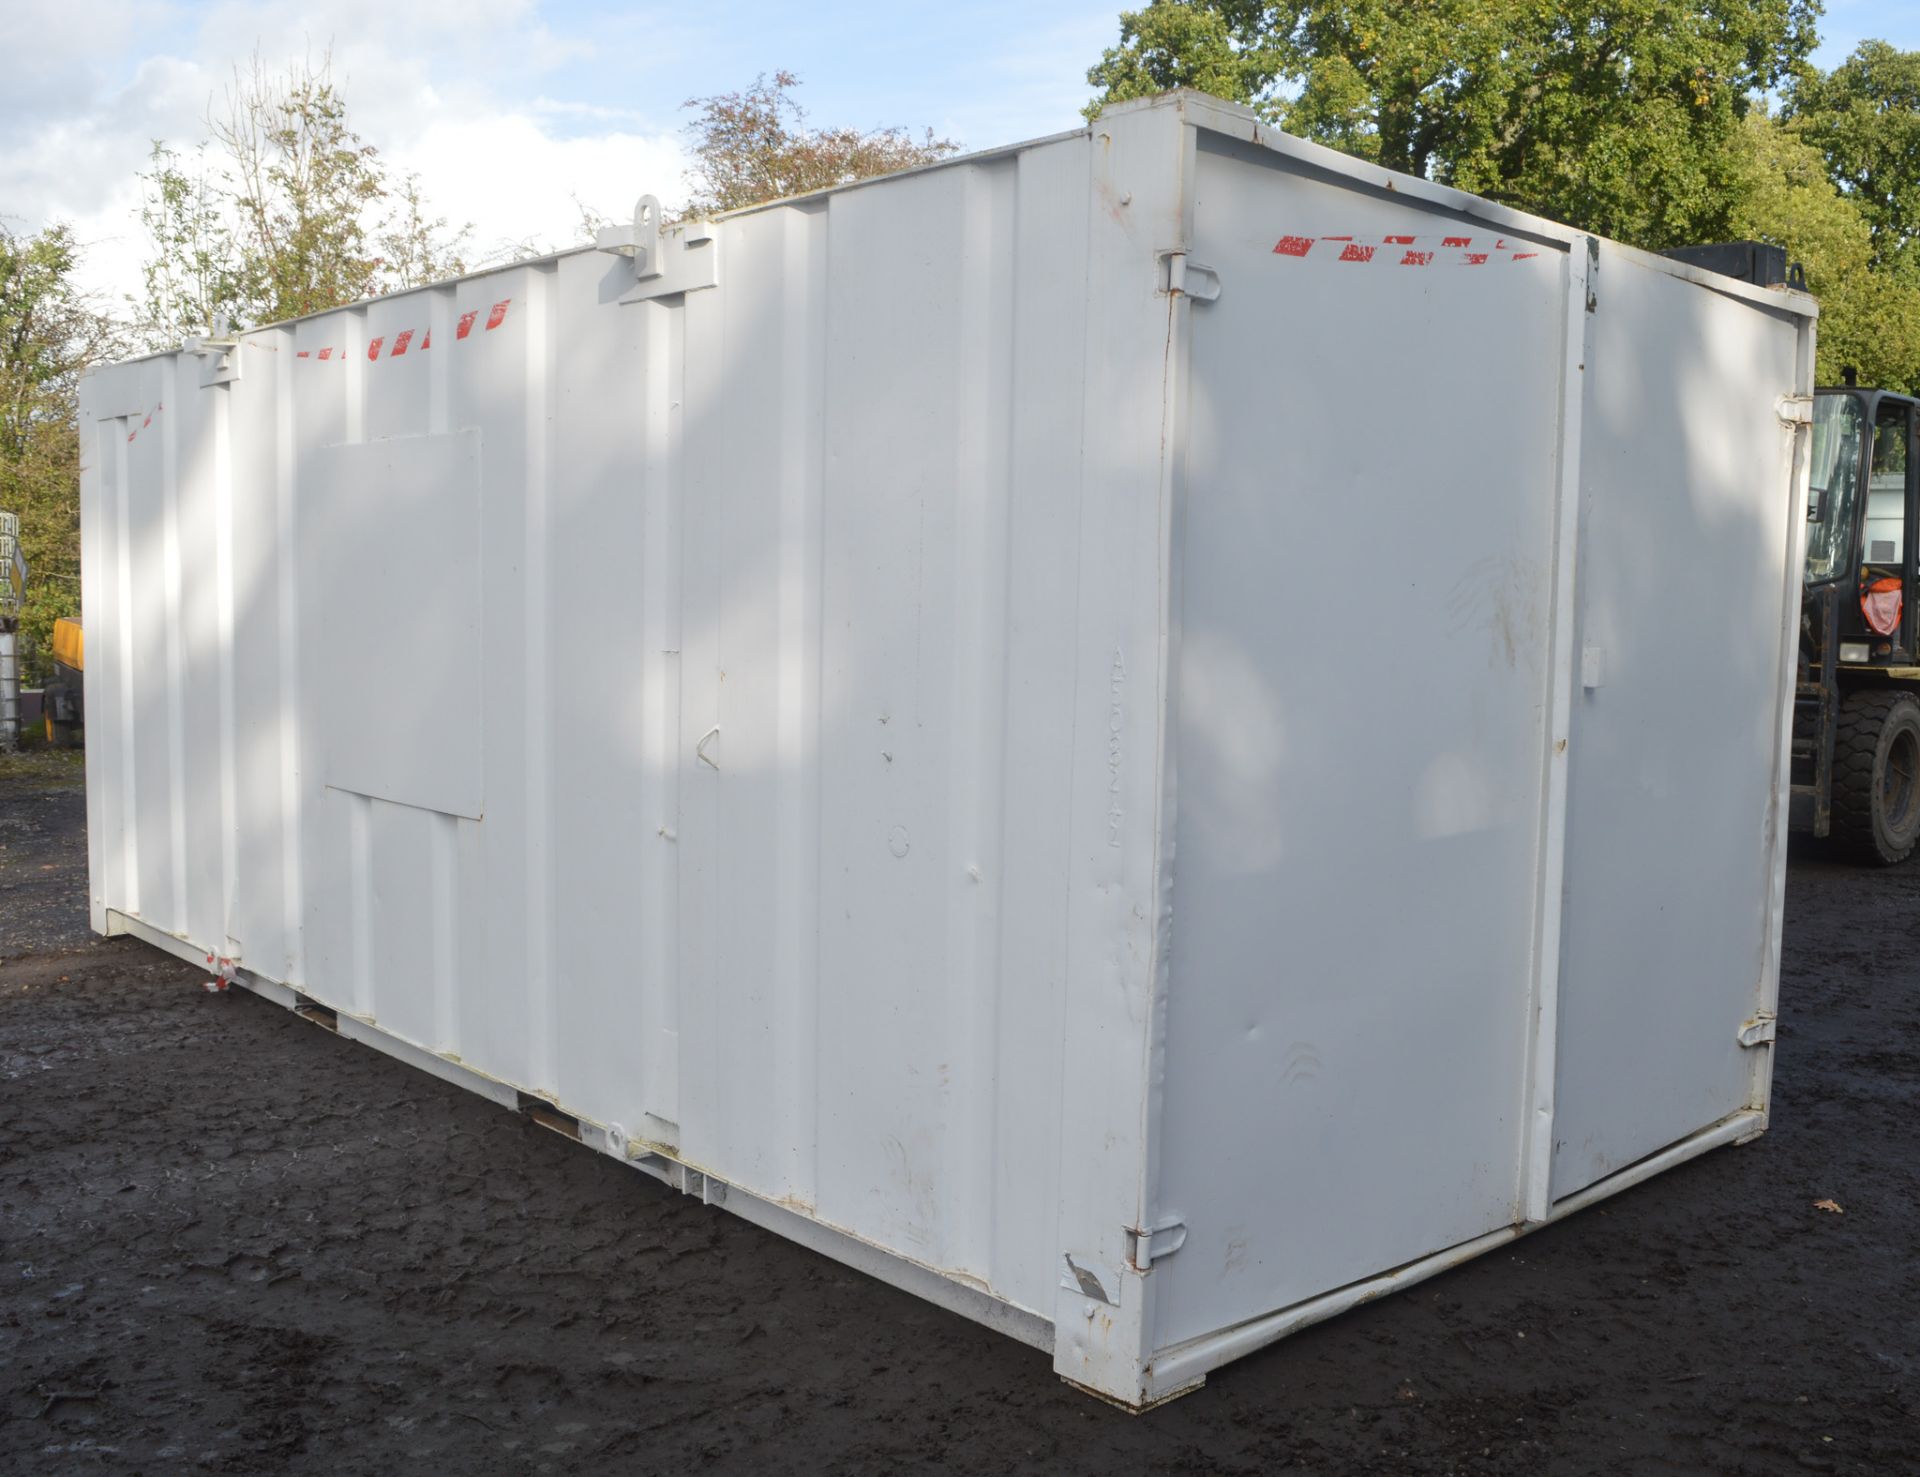 21 ft x 9 ft steel anti vandal shipping container  c/w keys in office  A508242 - Bild 4 aus 6